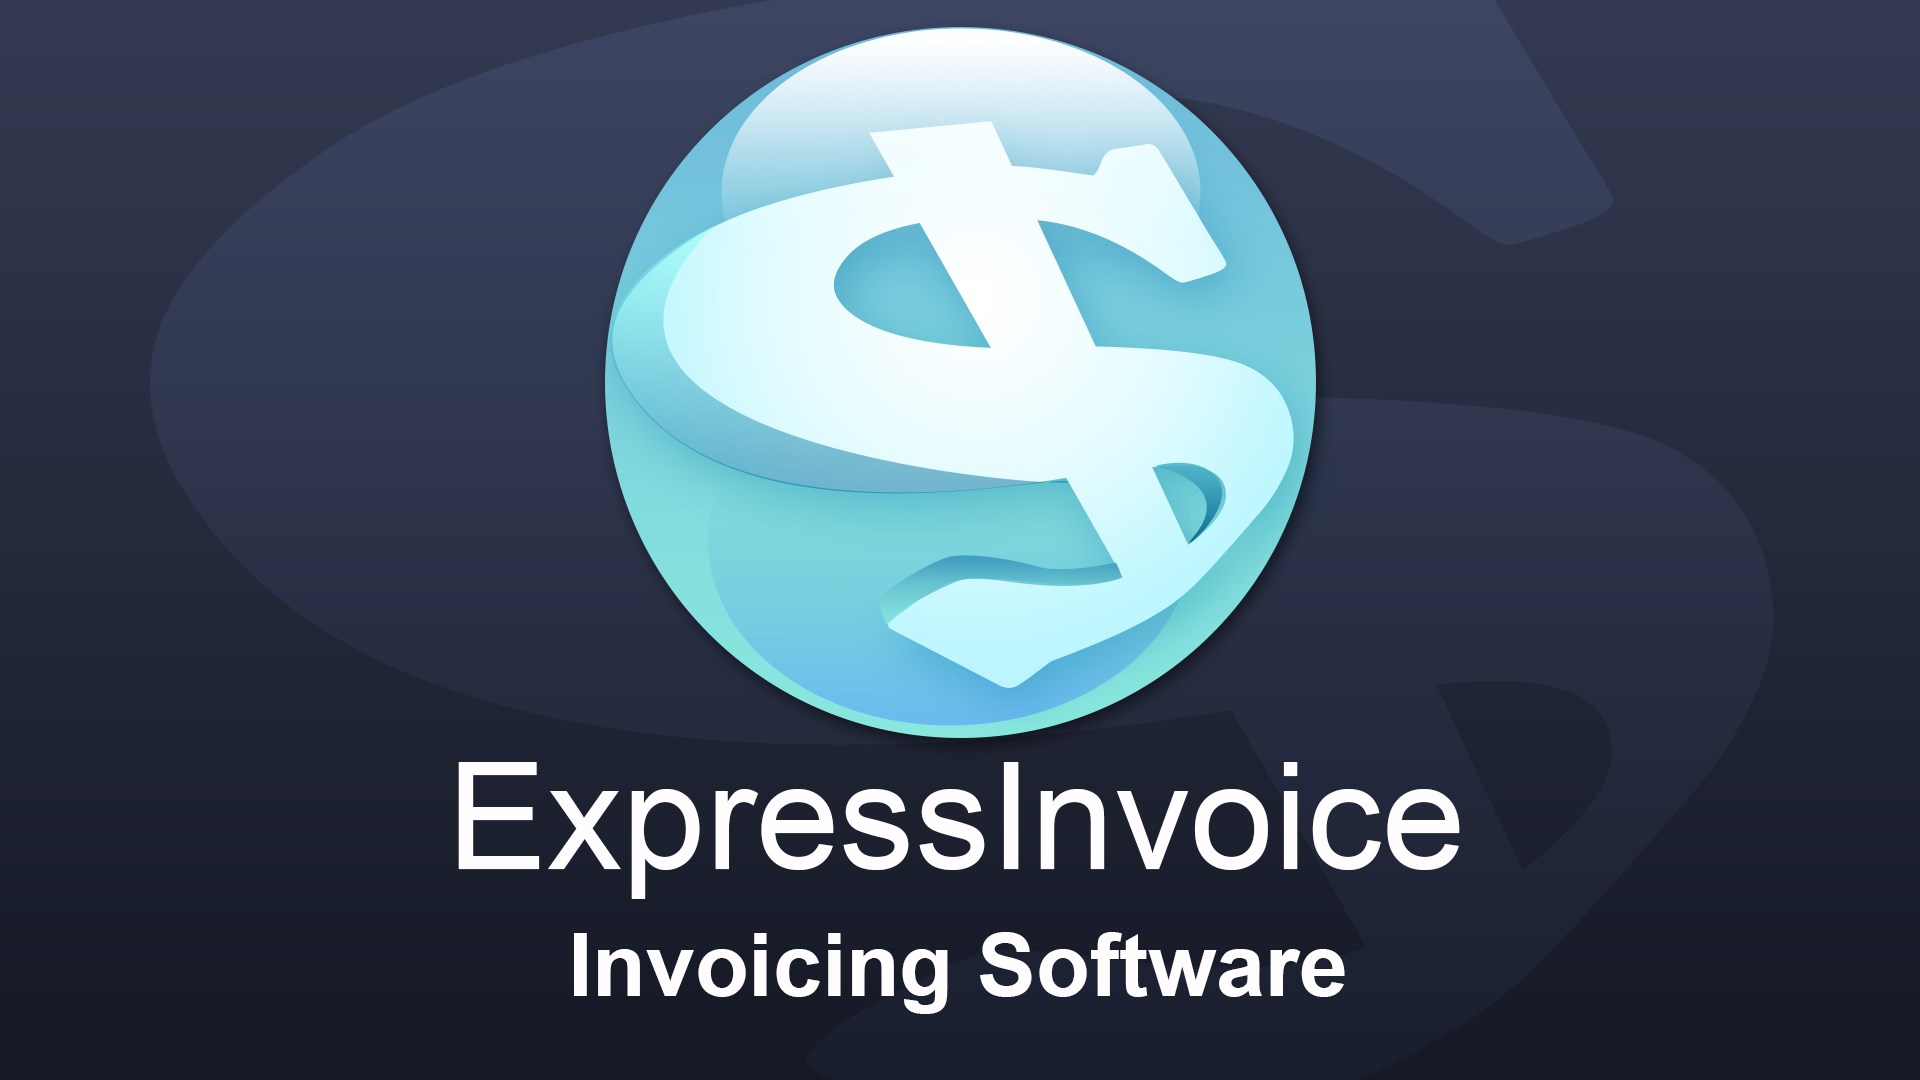 NCH: Express Invoice Invoicing Key $203.62